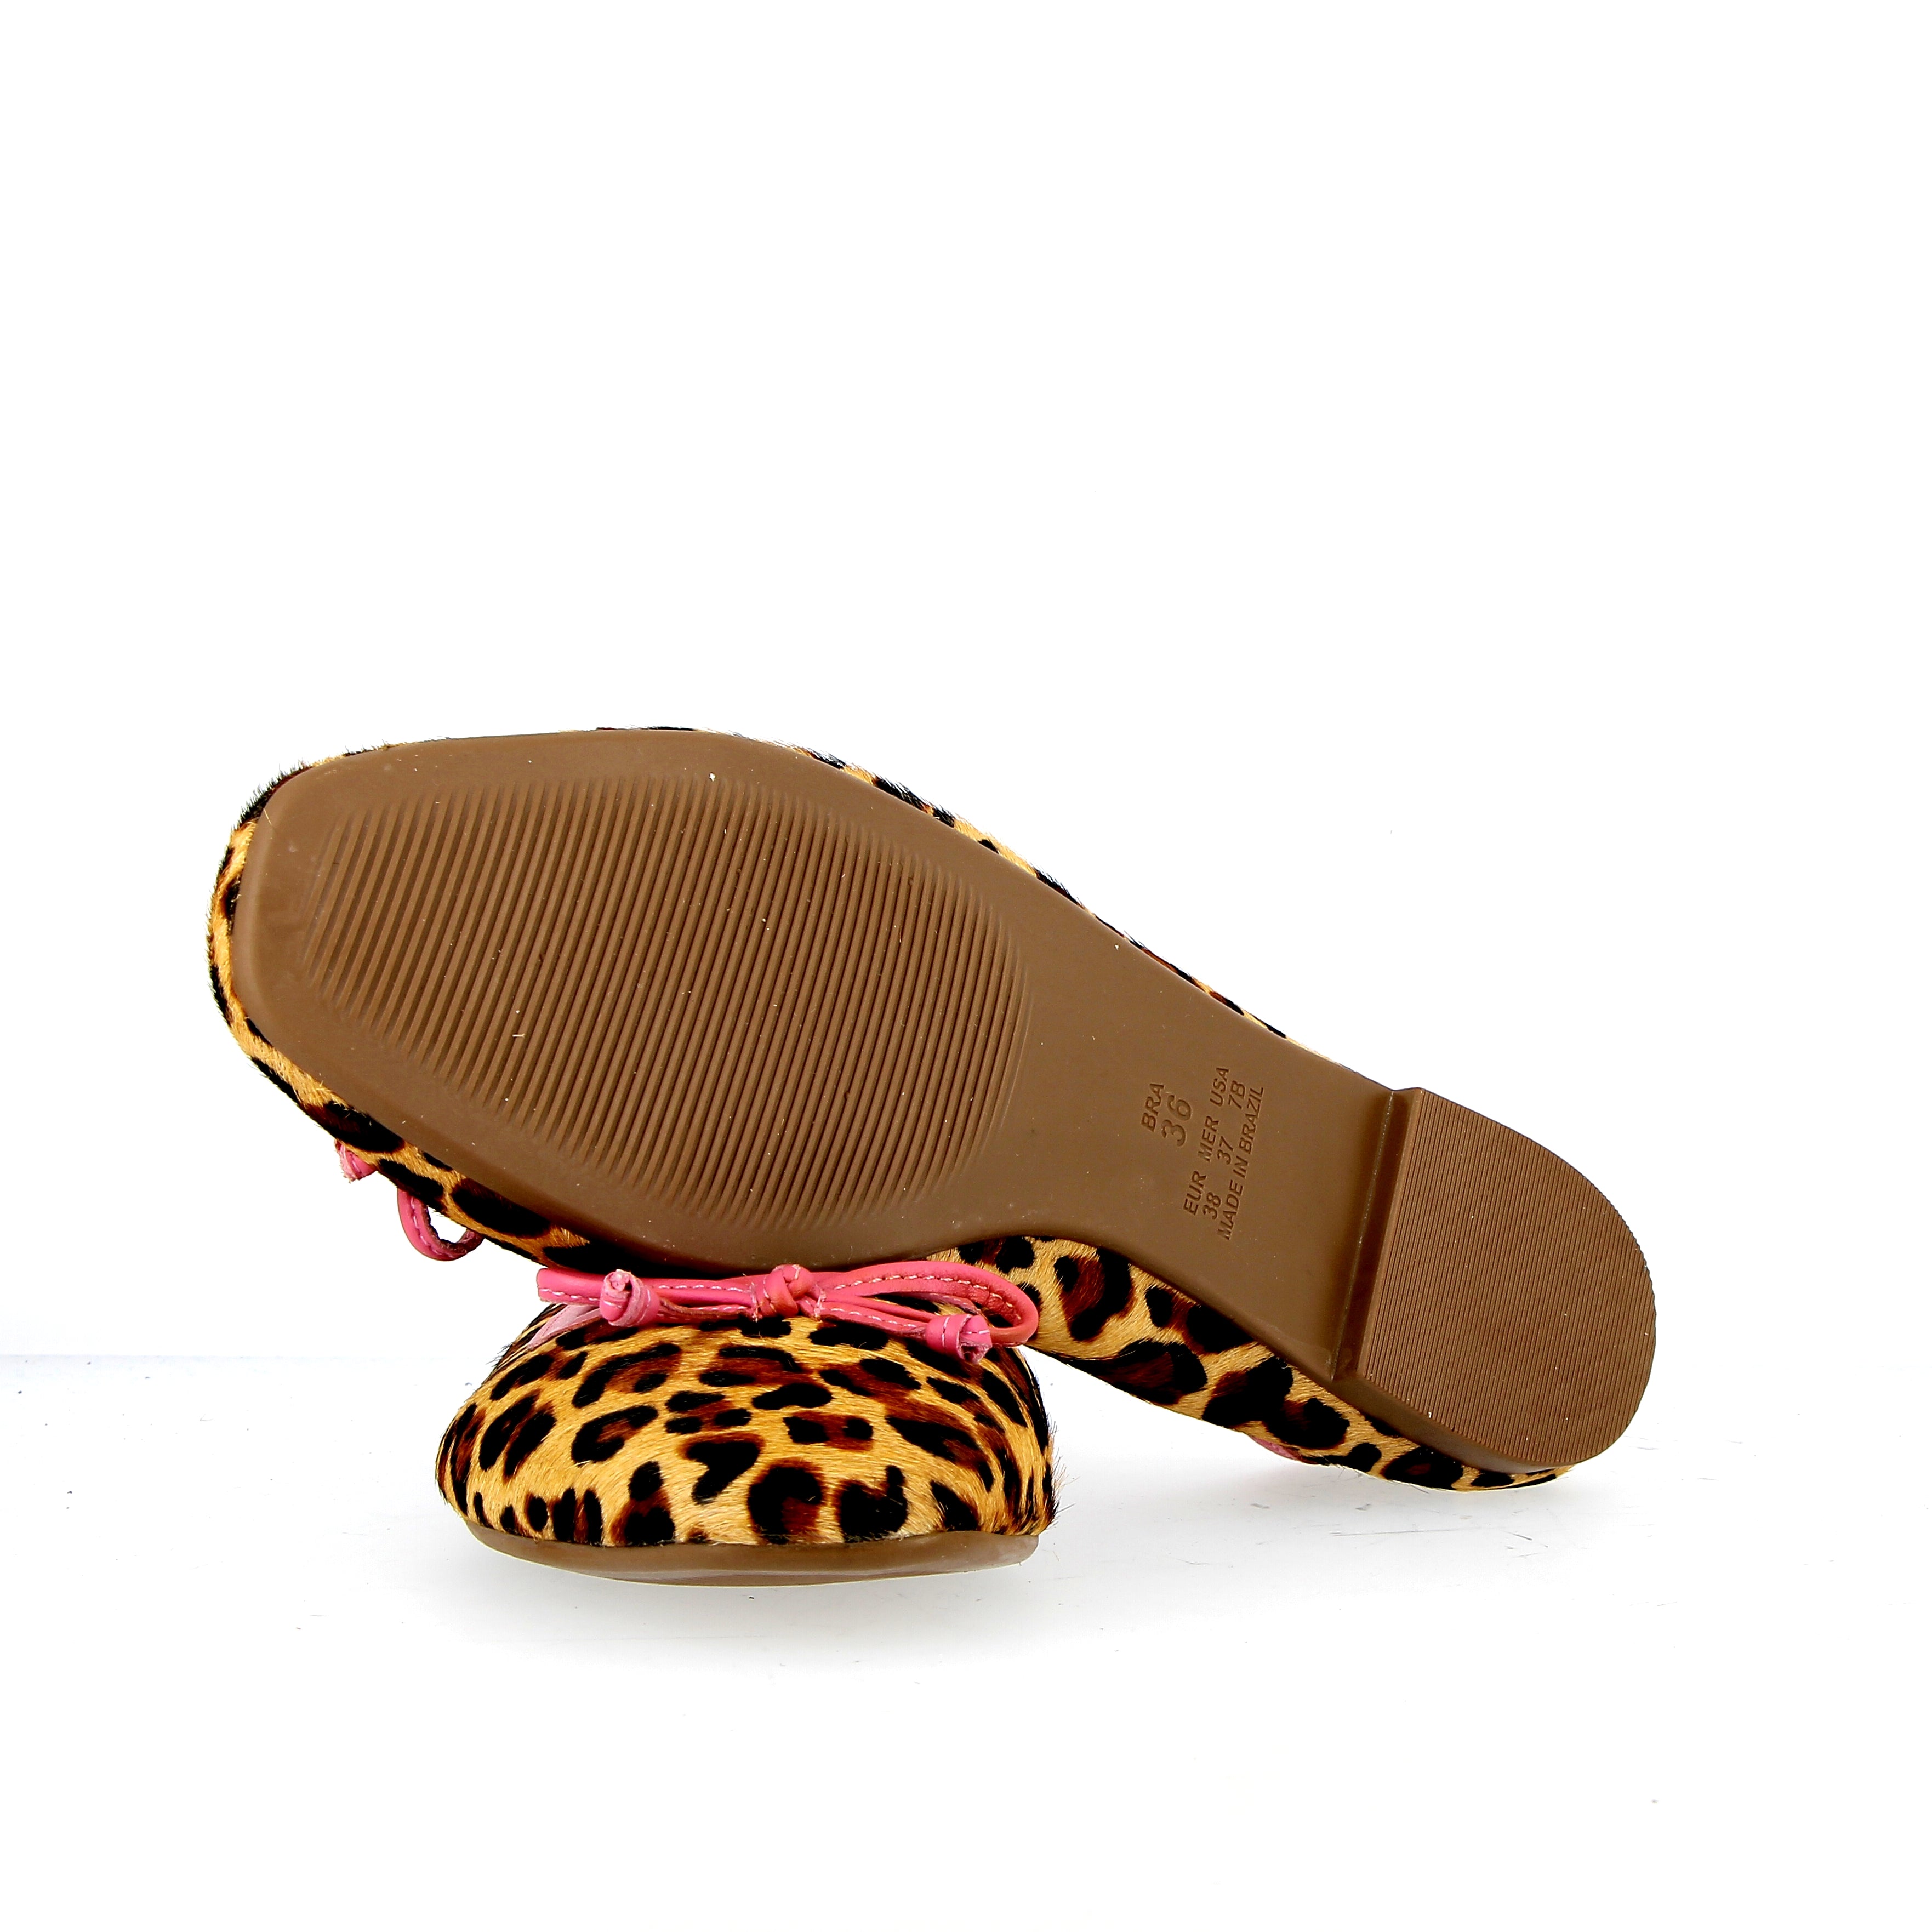 Leopard and pink flats in "ponies"